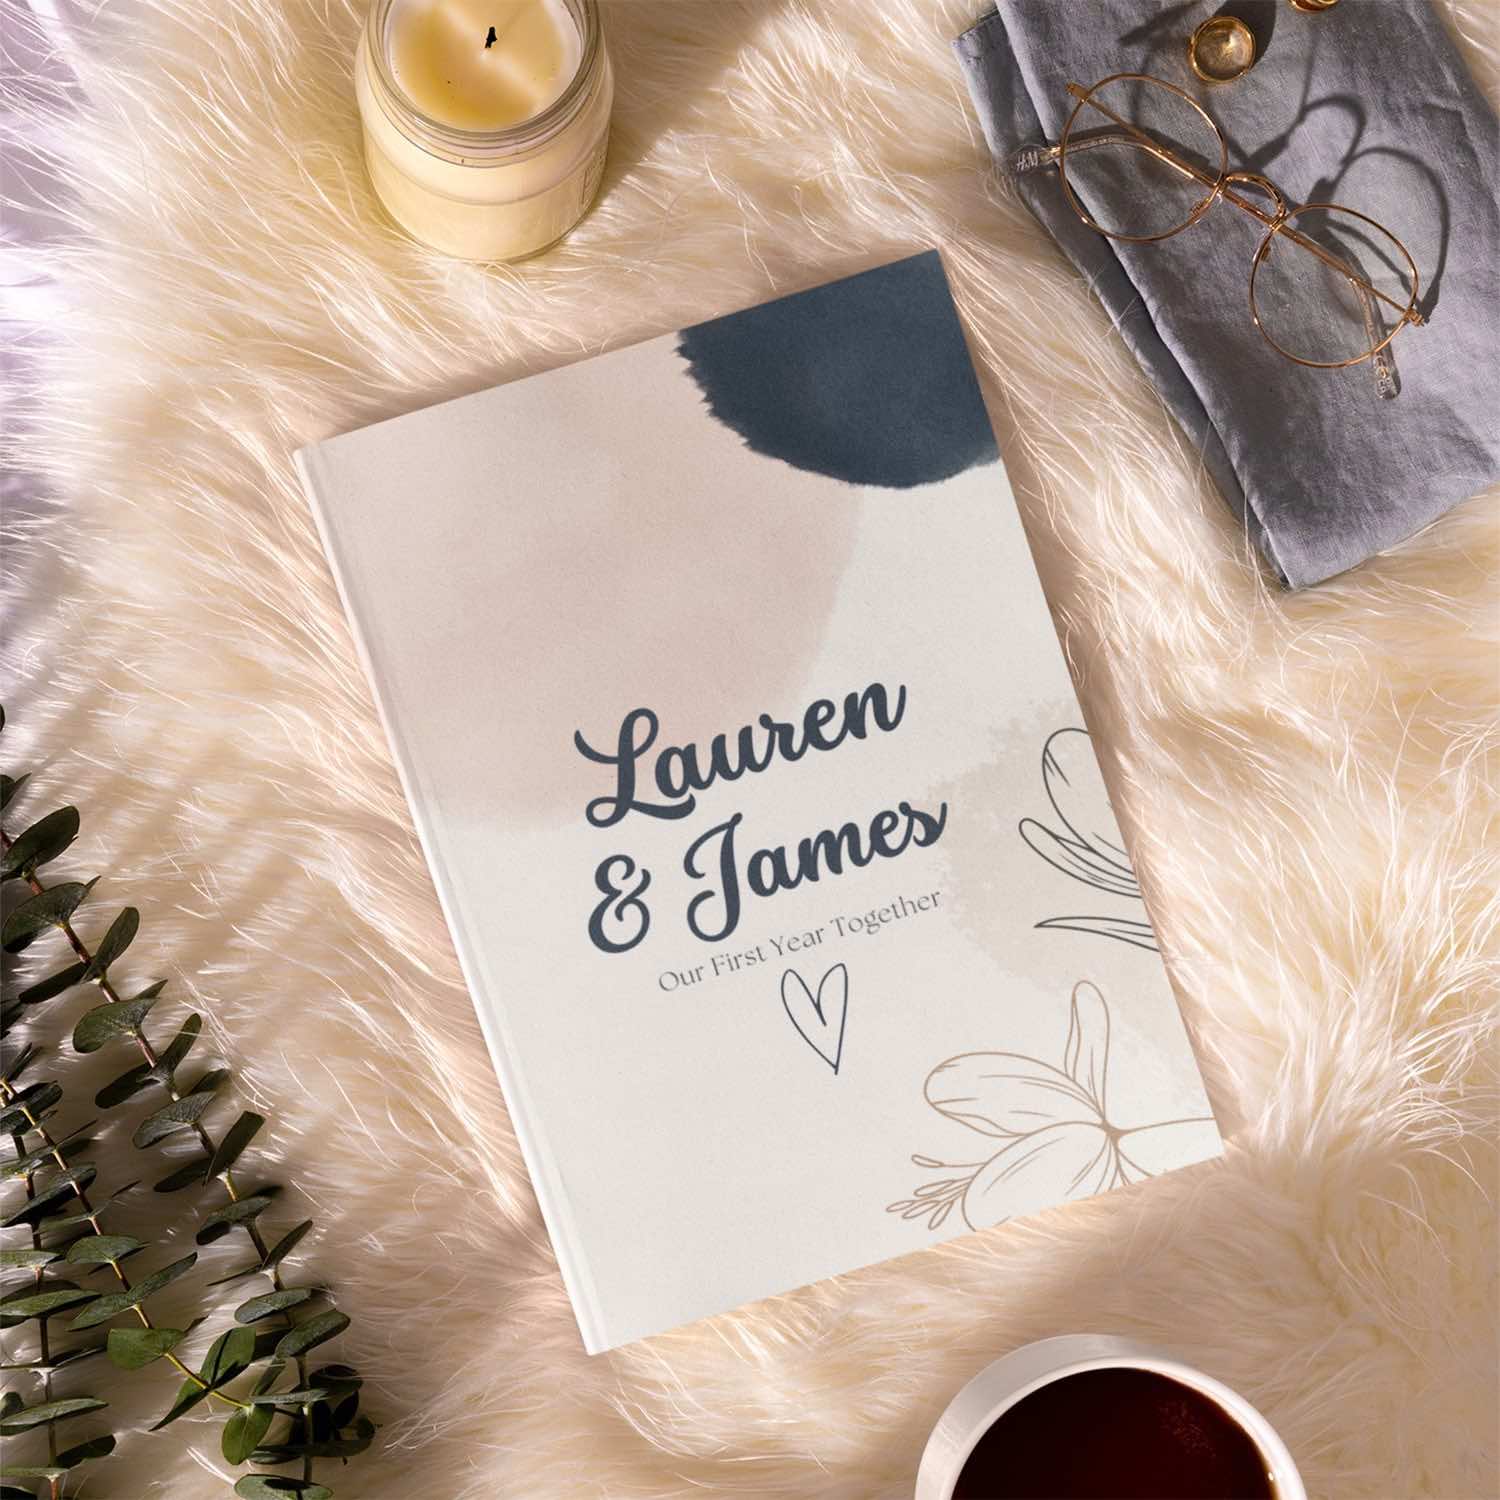 Personalized 'Our First Year' Anniversary Book